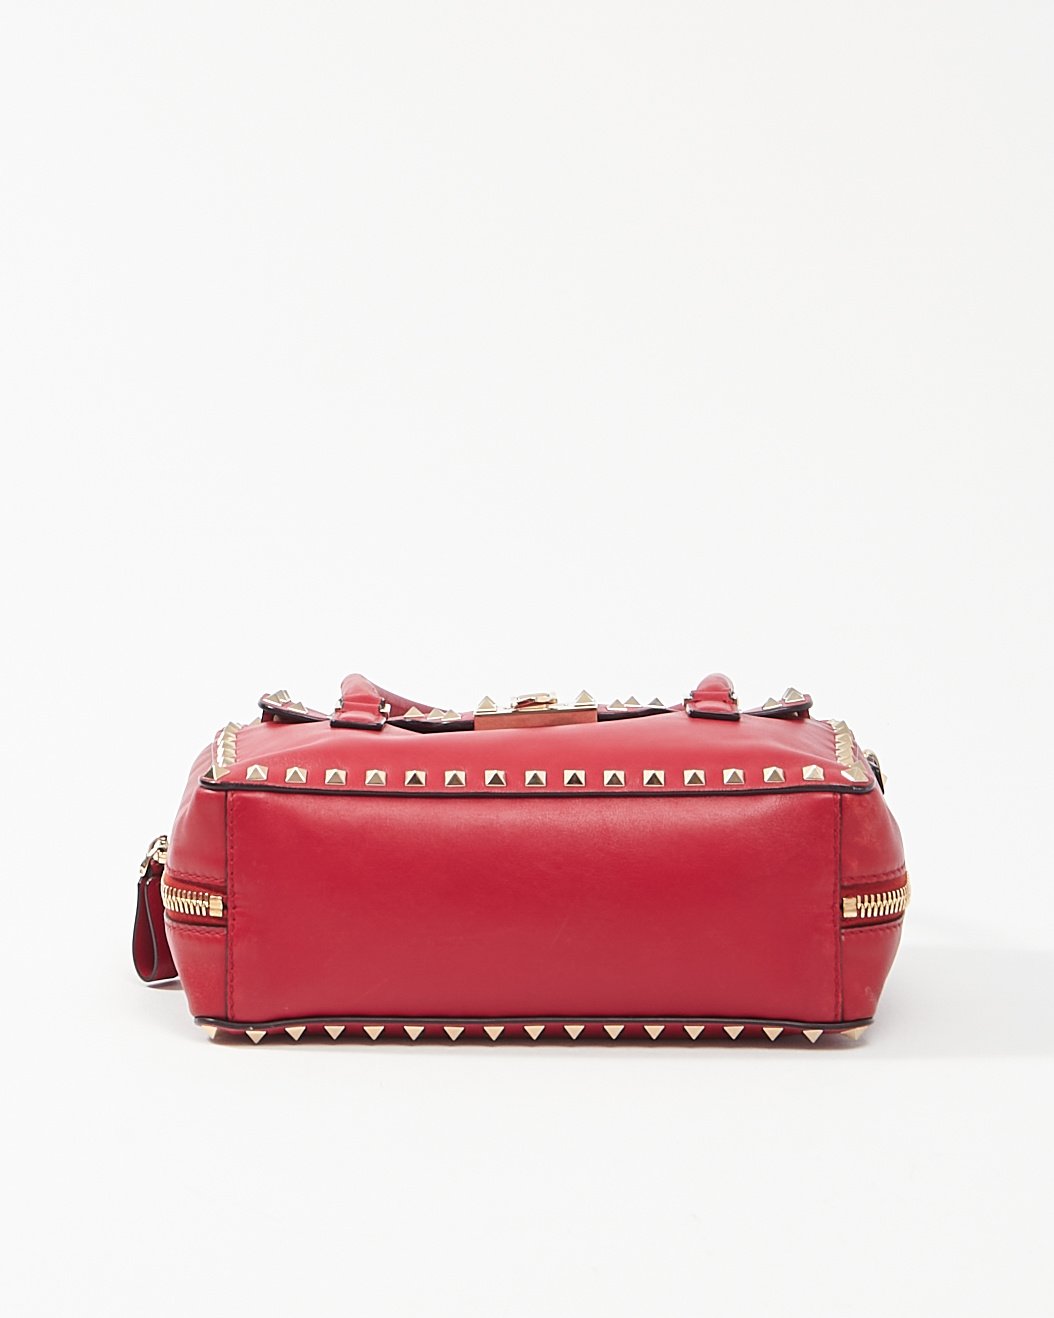 Valentino Red Leather Rockstud Top Handle Convertible Bag